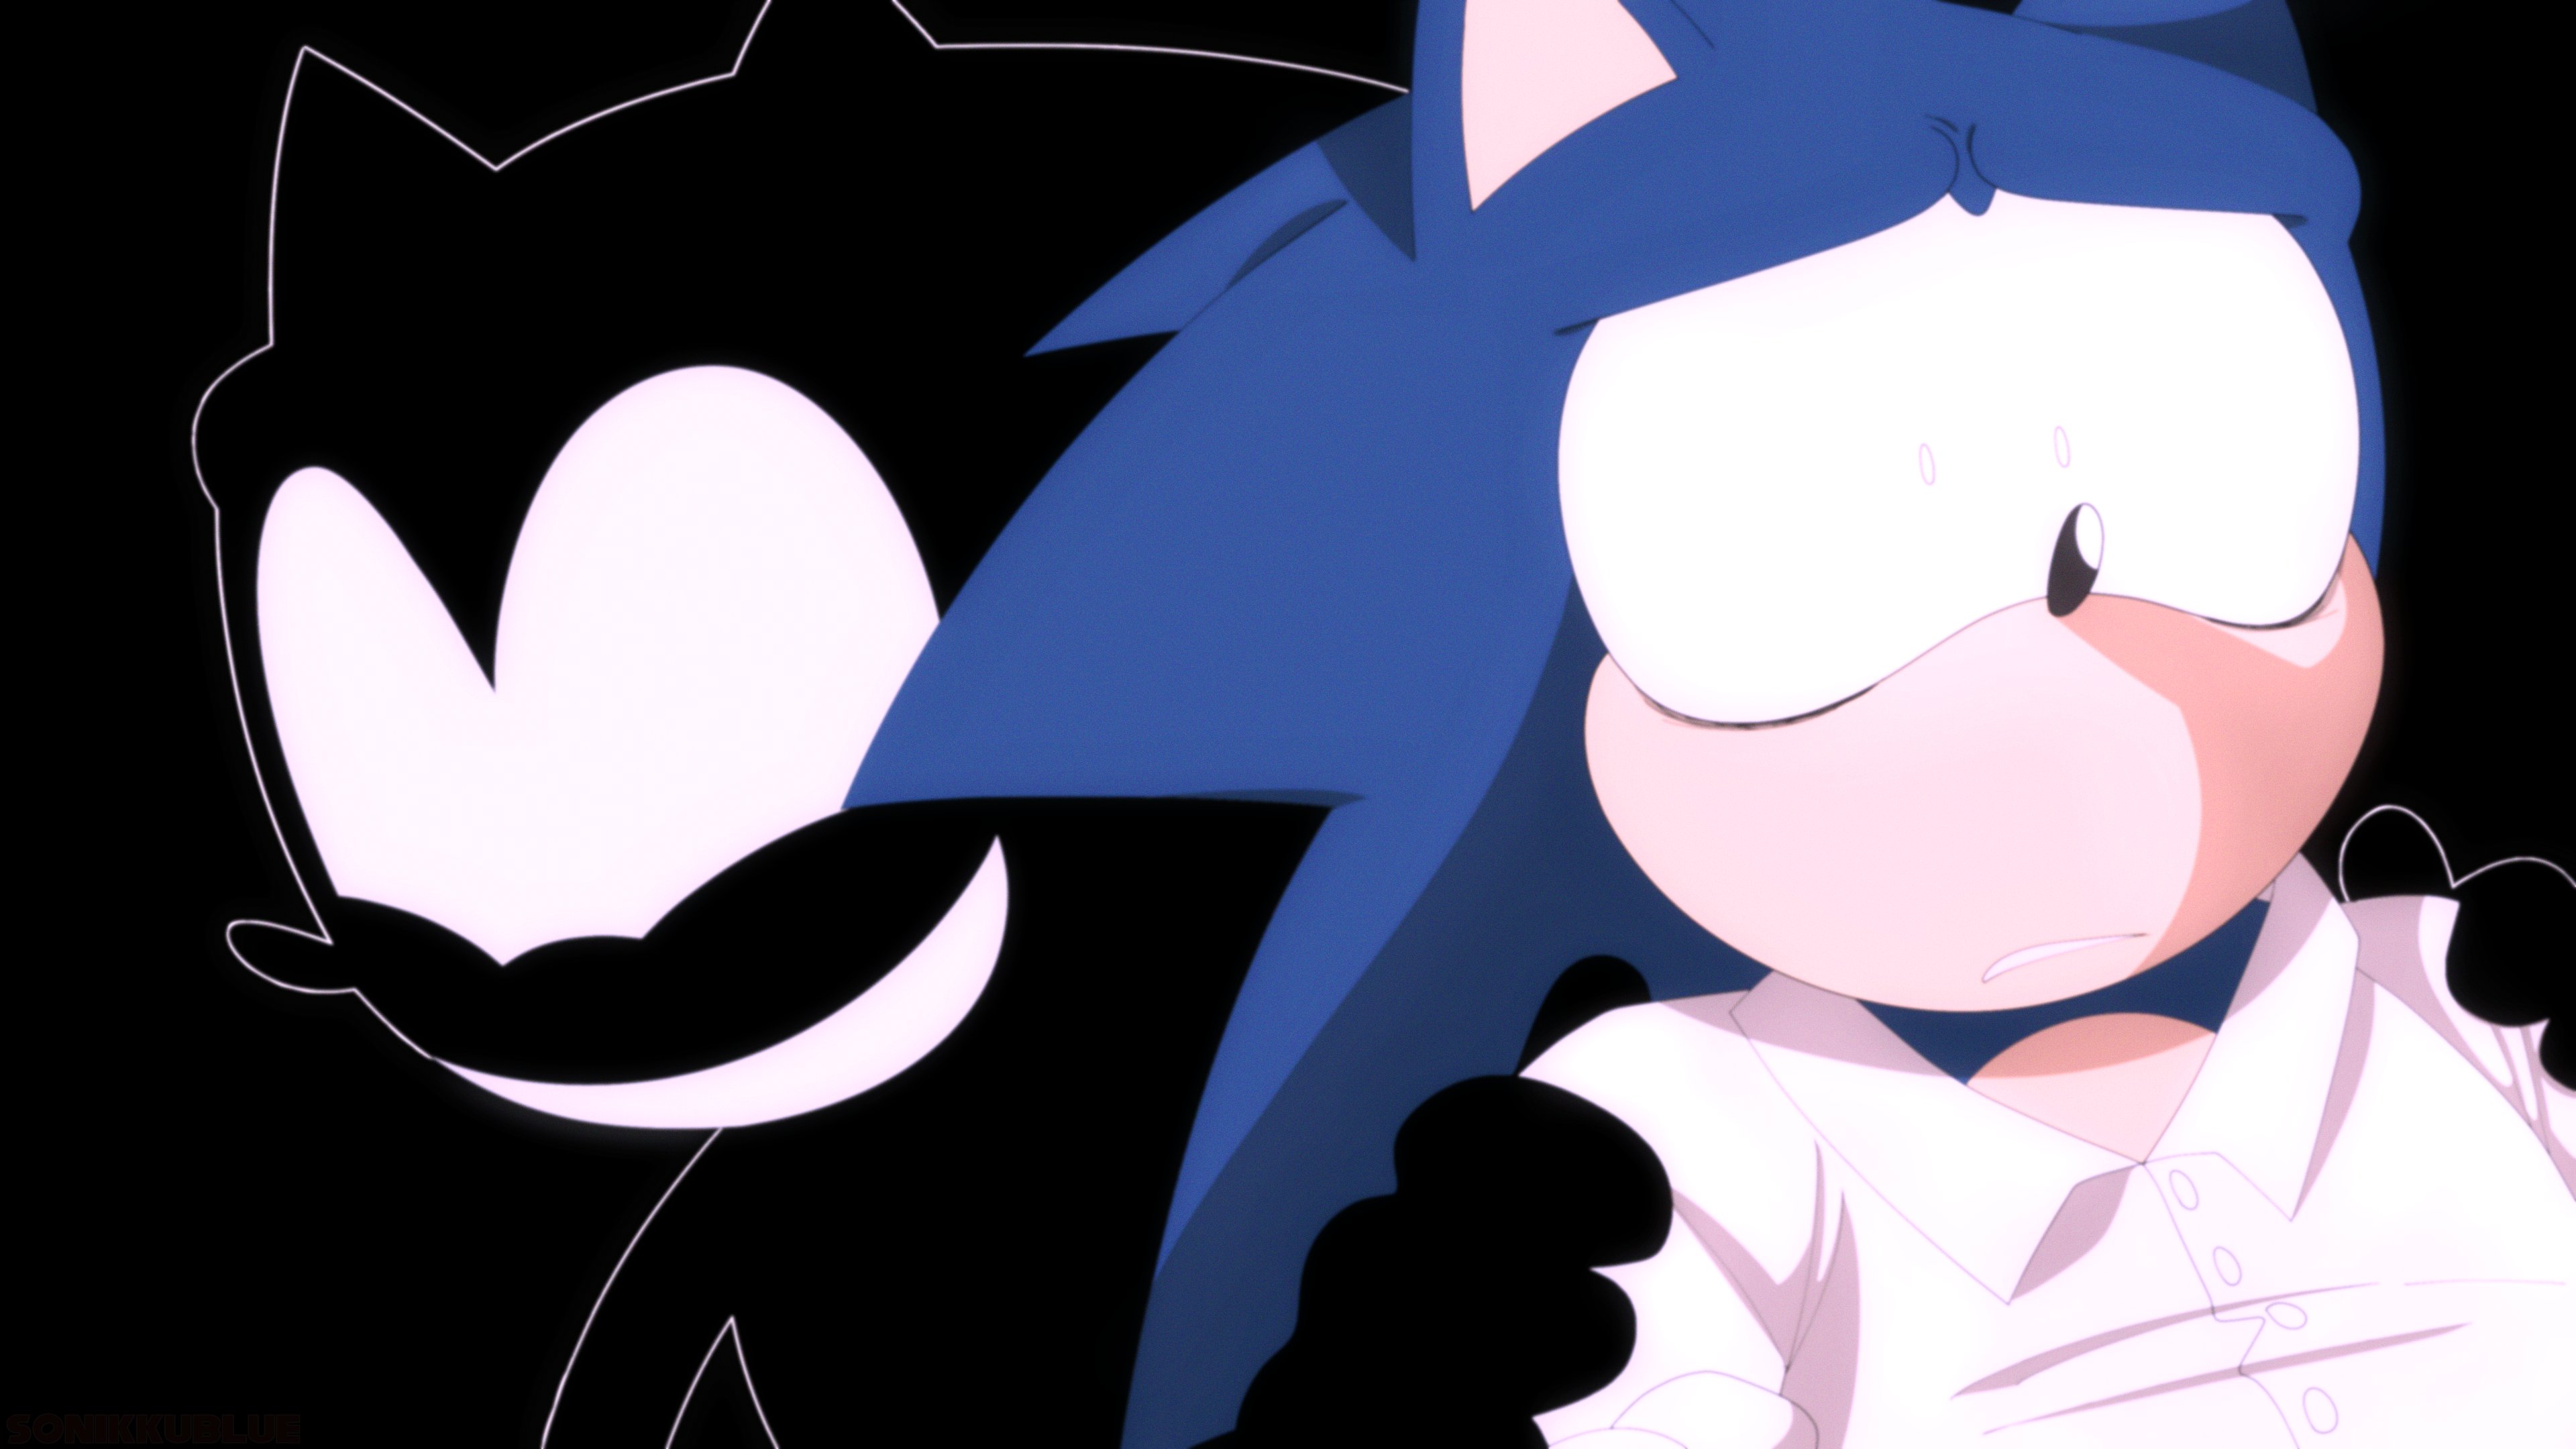 Megu on X: Twitter made me remember this Sonic X episode so I did